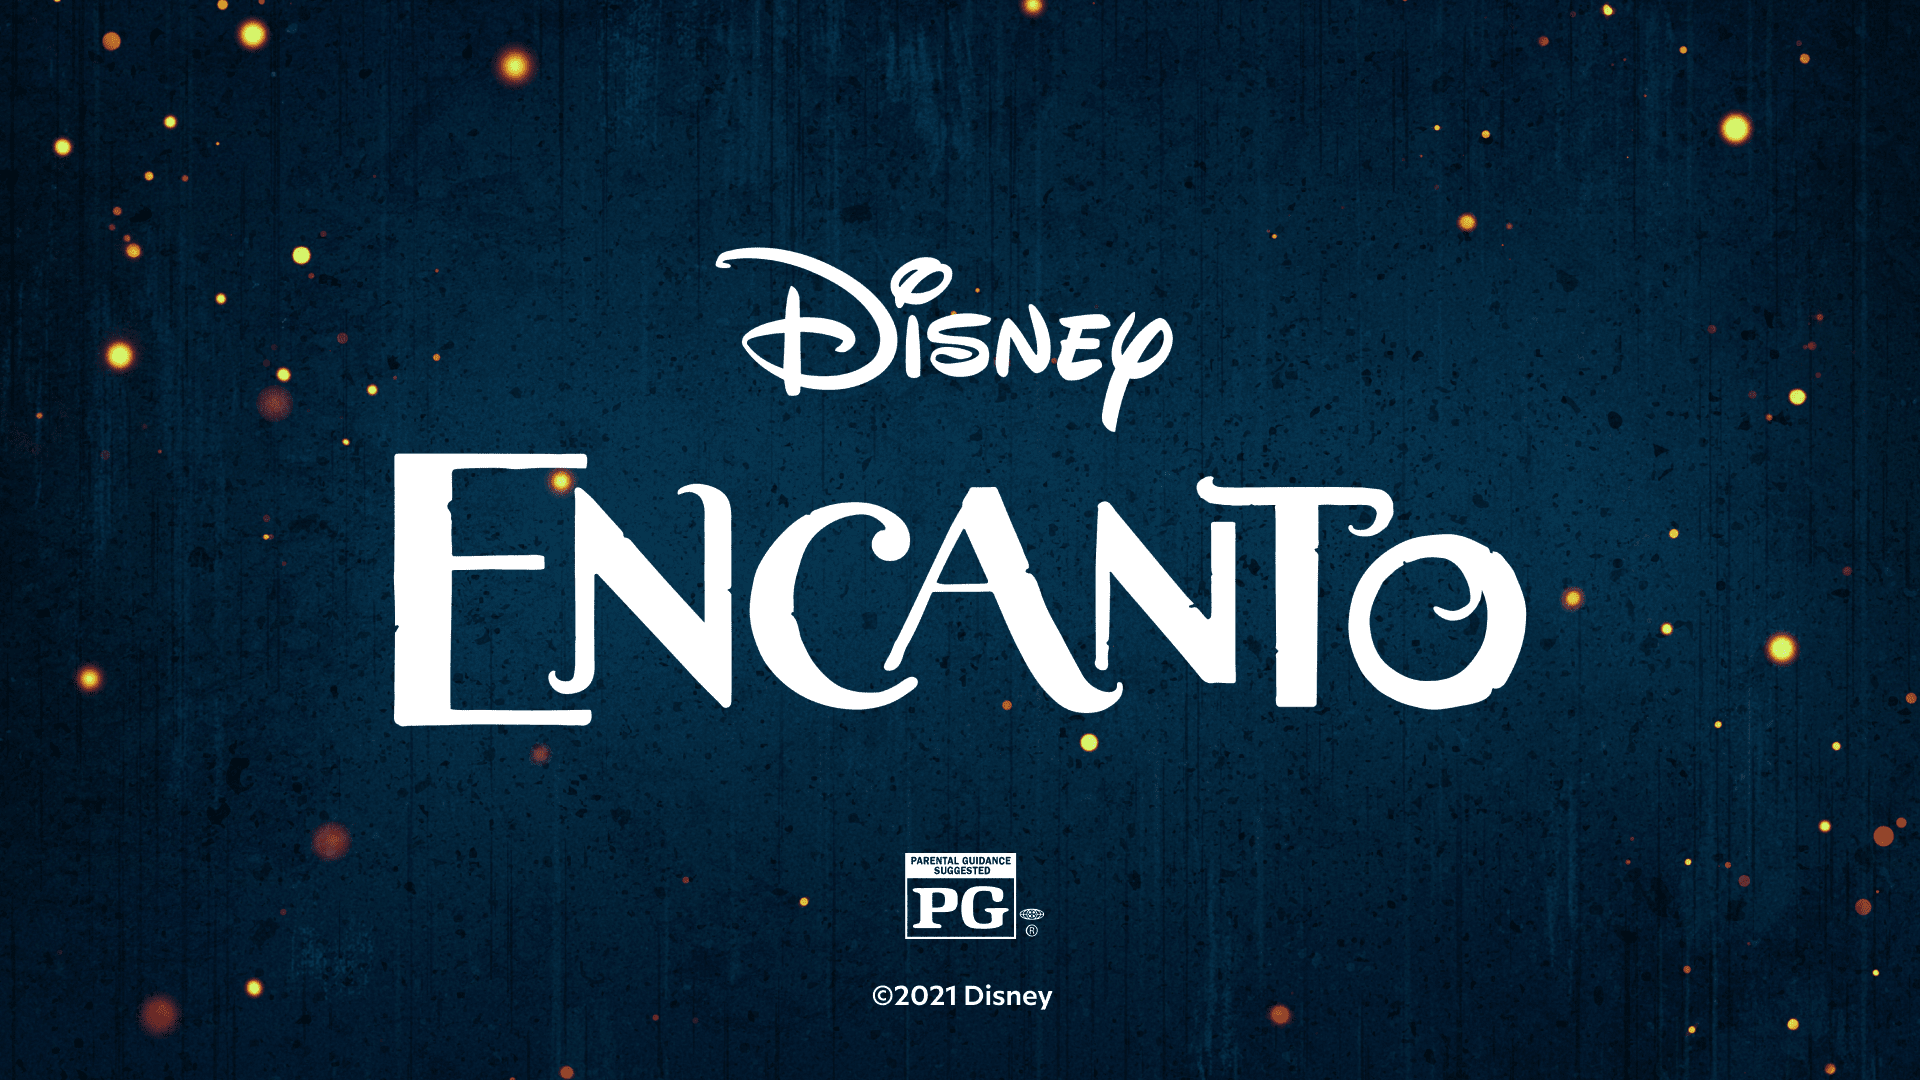 Babbel and Disney Team Up to Celebrate the Release of Disney’s "Encanto" and Language's Role in Opening Doors to Discovery, Adventure and Understanding